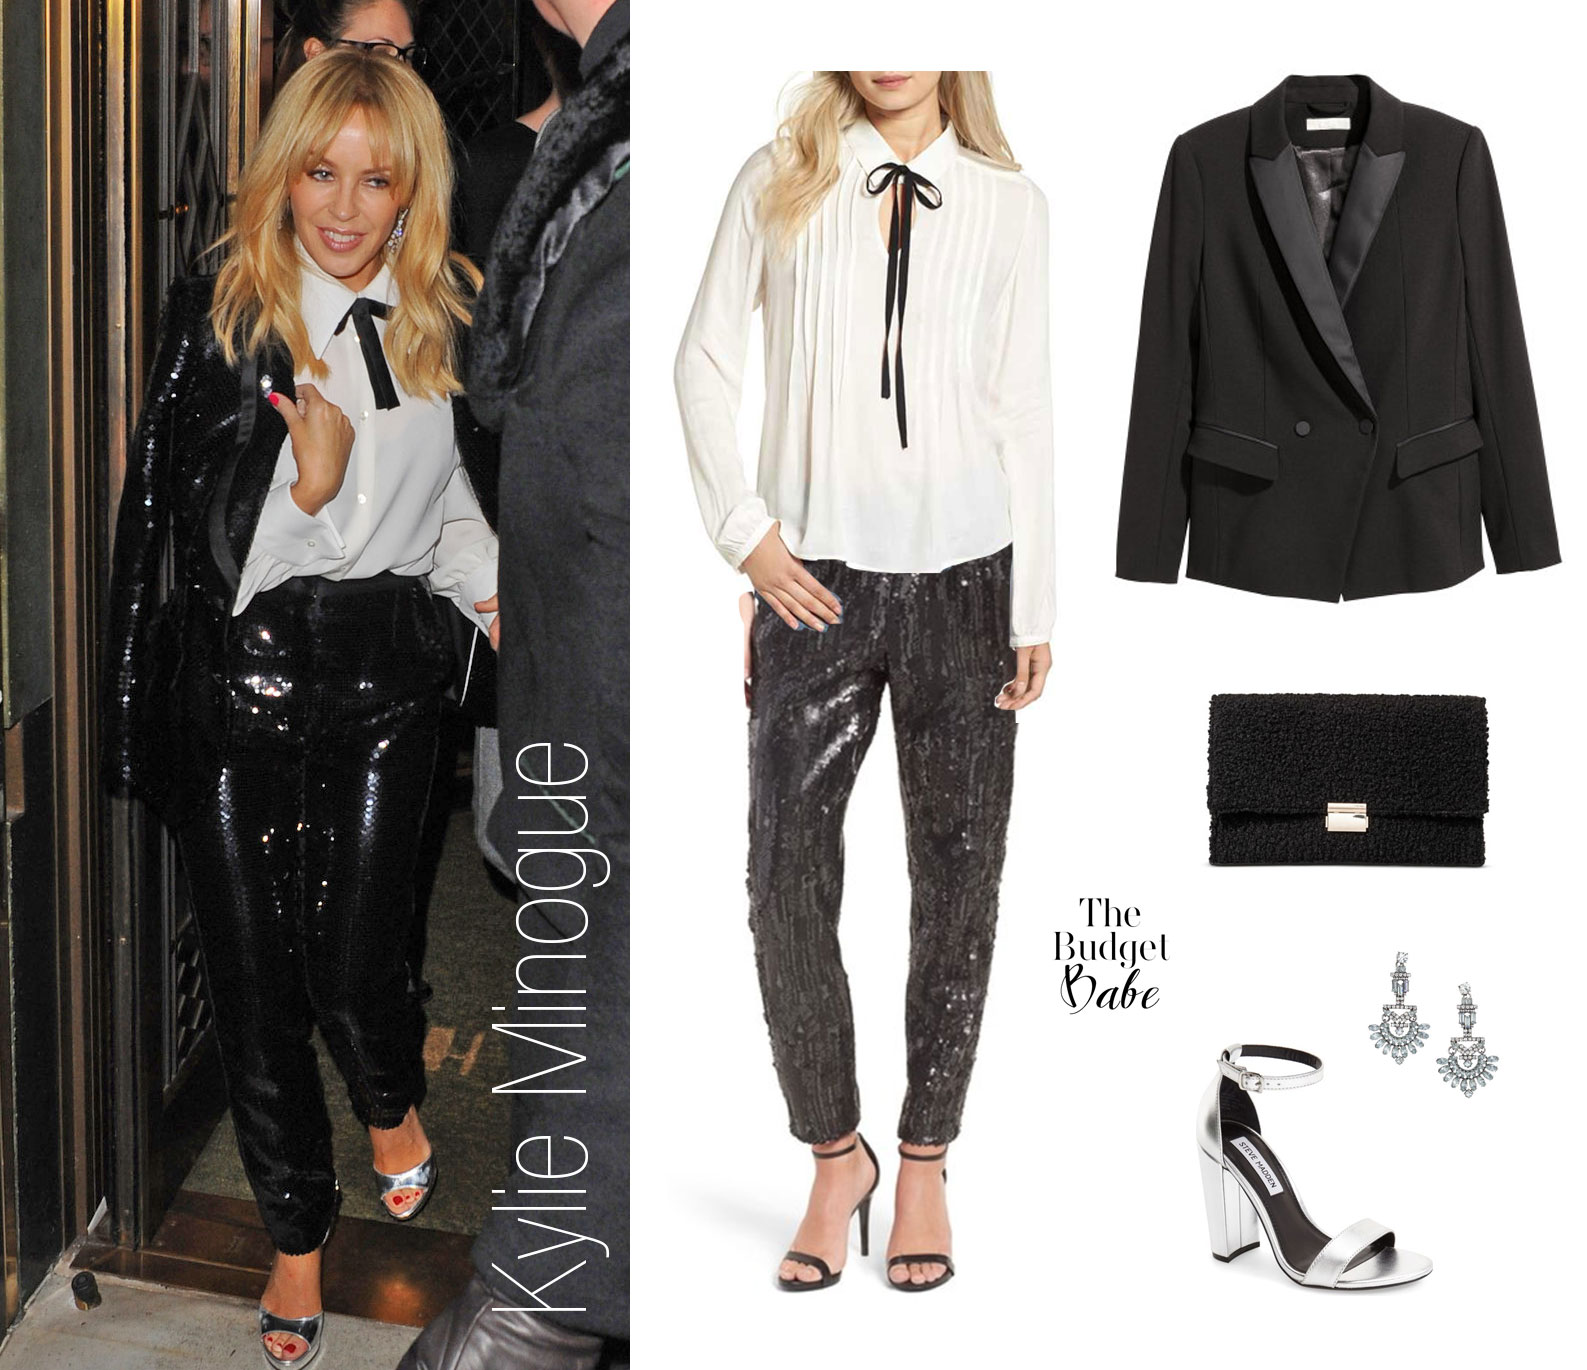 Try sequin pants with a bow tie blouse like Kylie Minogue for your next holiday party.